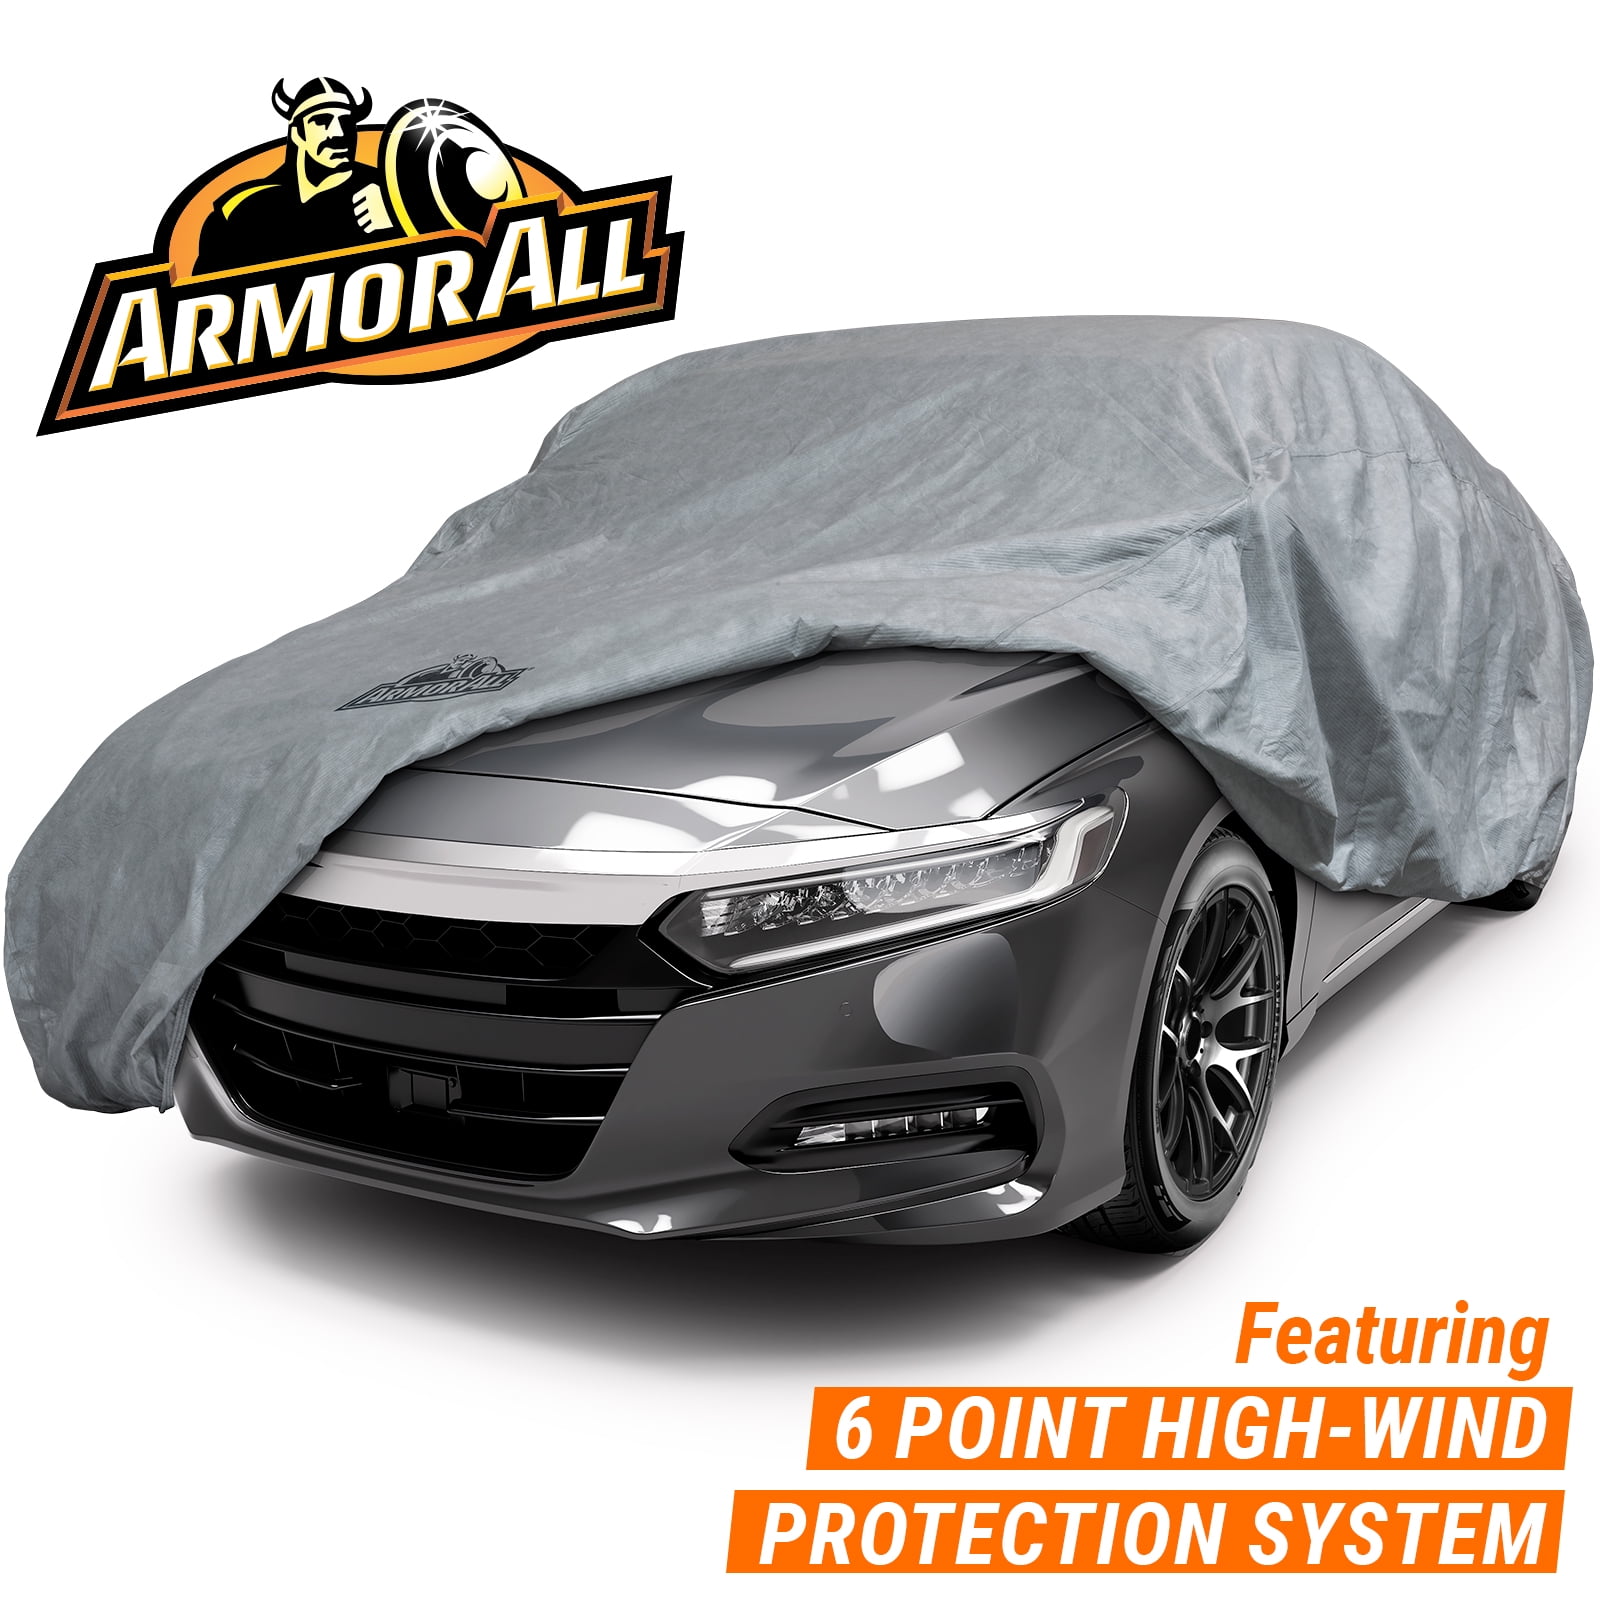 Armor All Car Cover, Heavy Duty All Weather Protection, Fits Sedan Length  up to 175